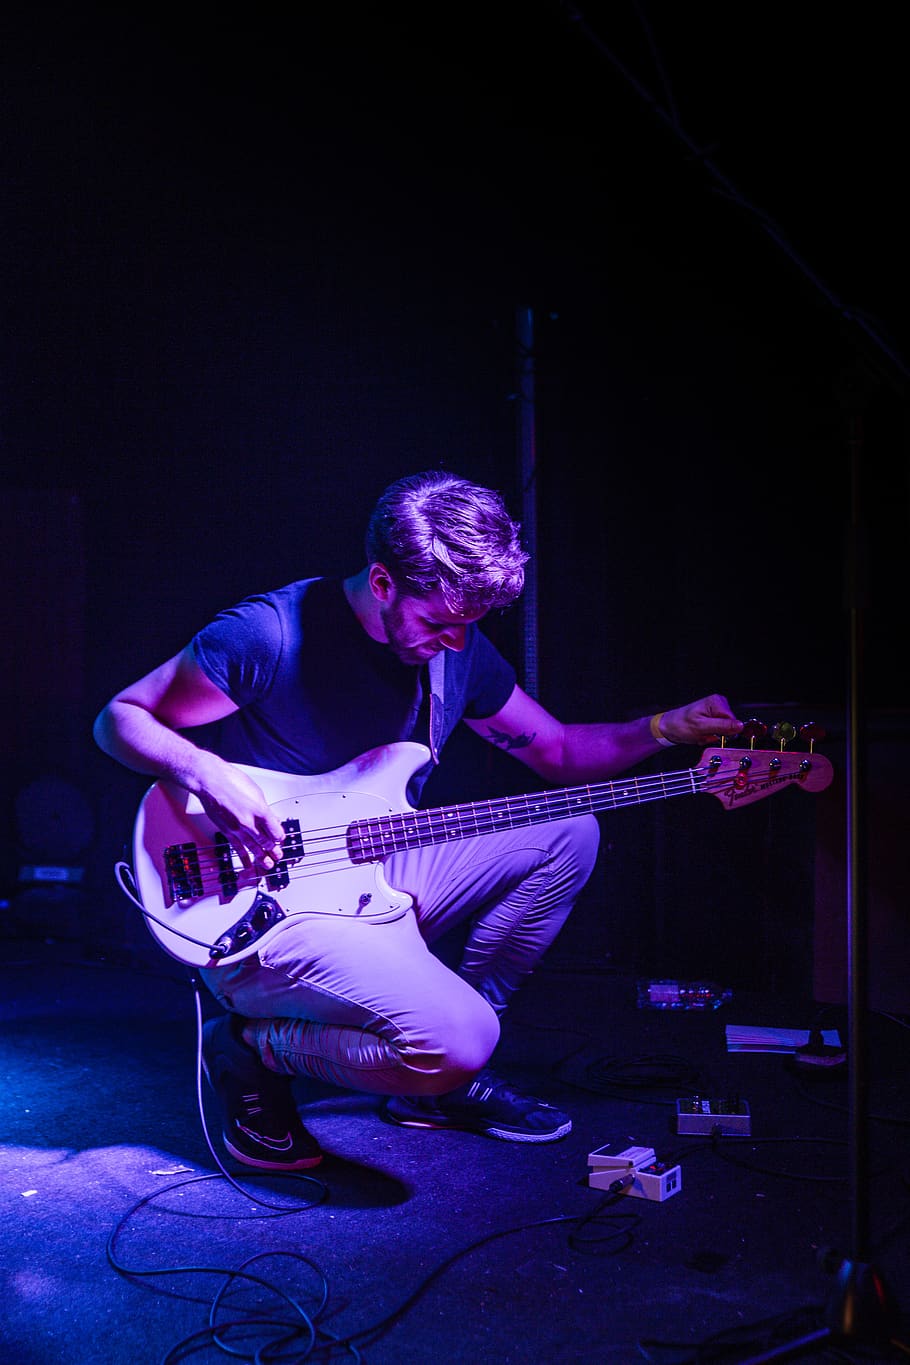 Man Tuning His Bass Guitar on Stage, electric guitar, guitarist